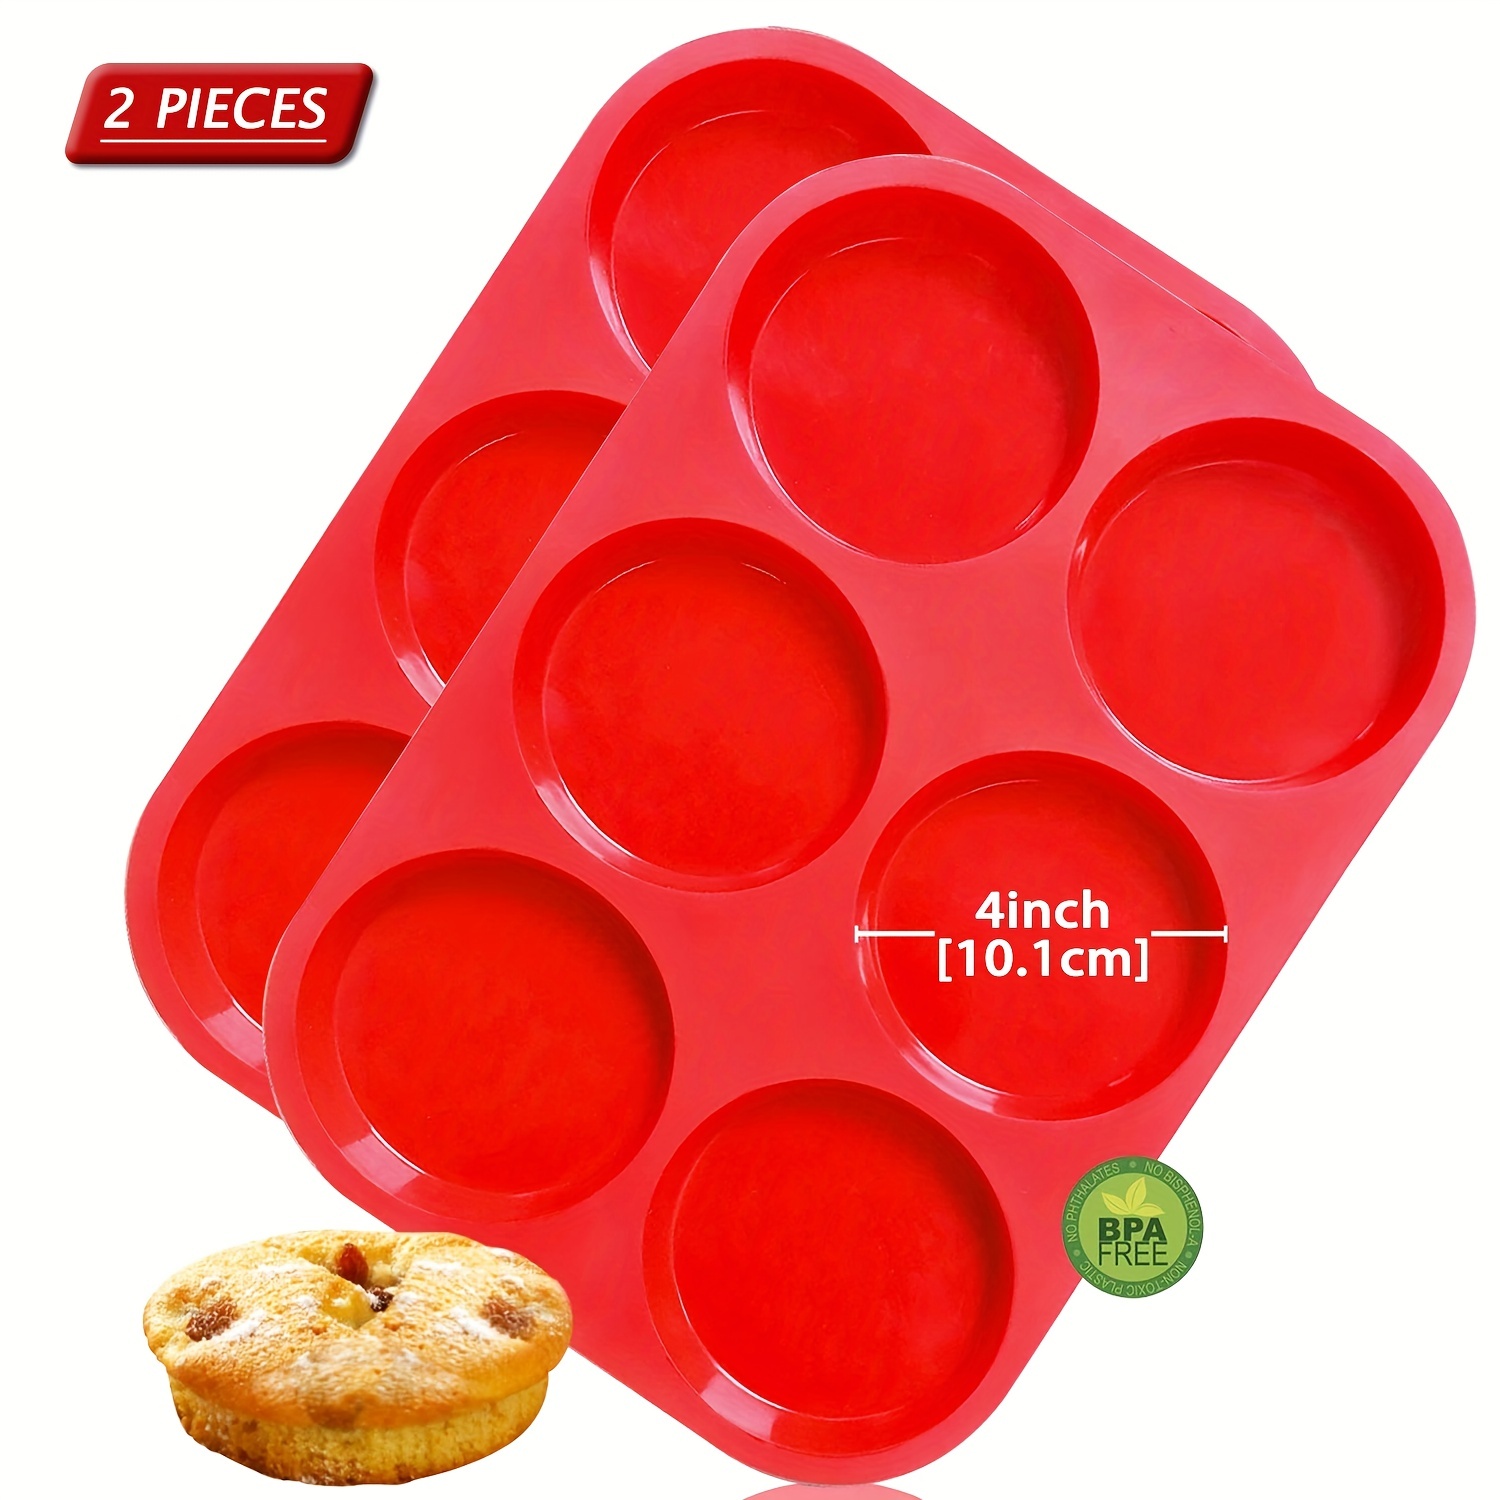 MUFFIN TOP PAN SILICONE